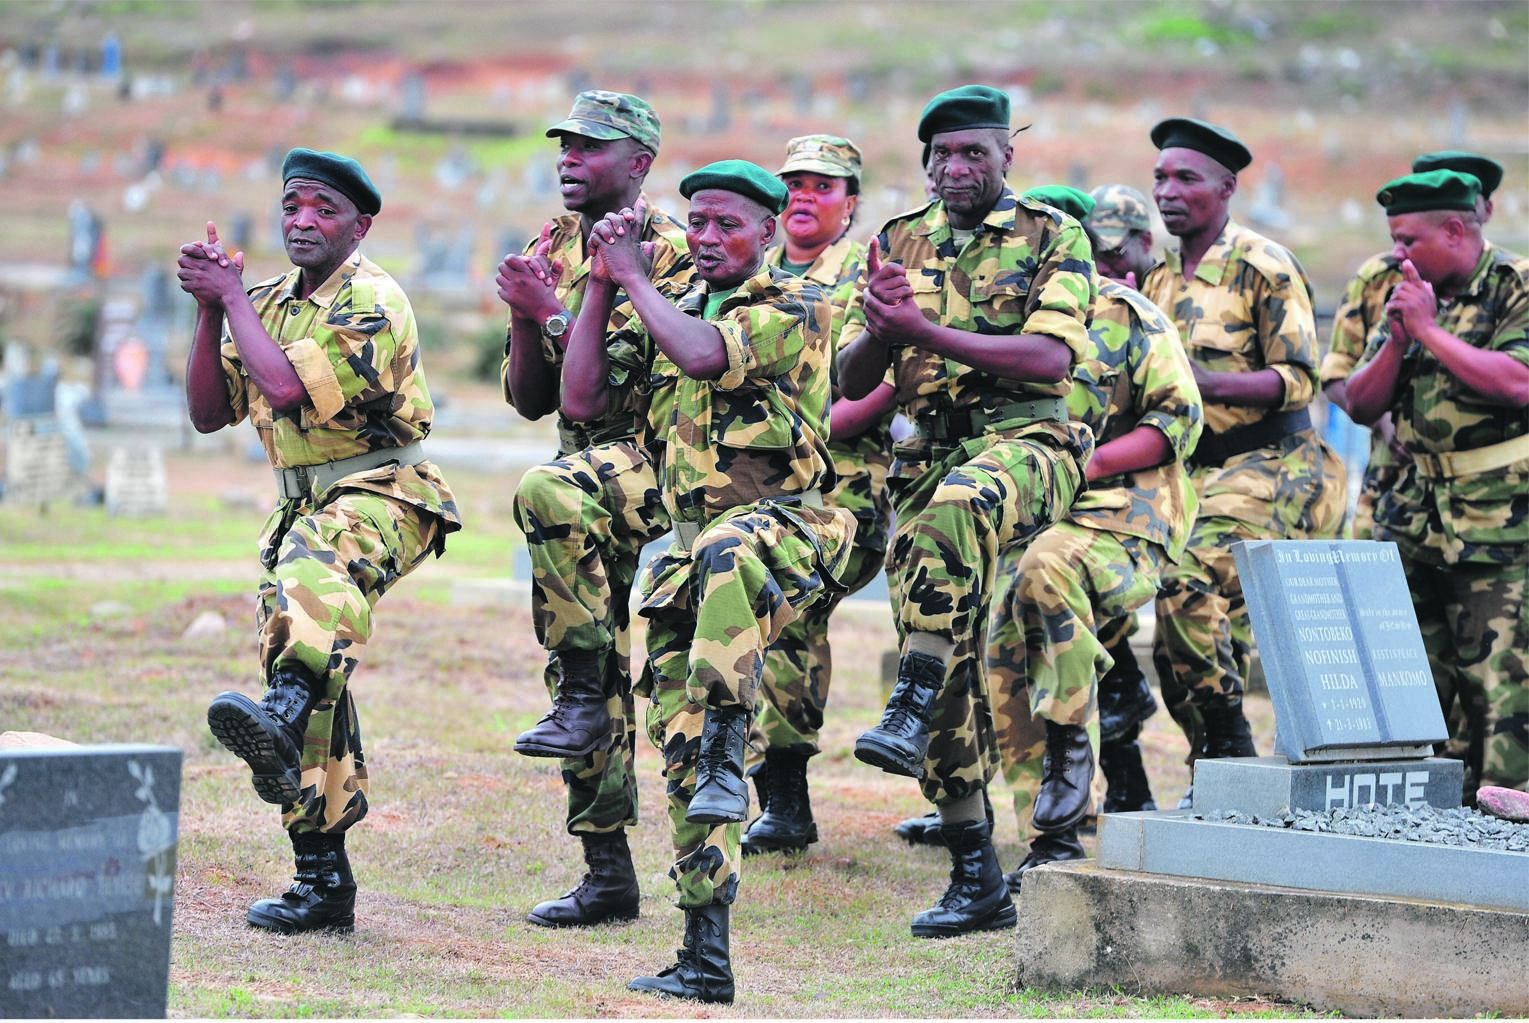 Members of the ANC’s former military wing, Umkhonto weSizwe, perform at a ceremony. The upcoming national conference of the ANC’s former military wing is shaping up to be a bitter face-off between the so-called generals and the foot soldiers. Picture: Deon Ferreira